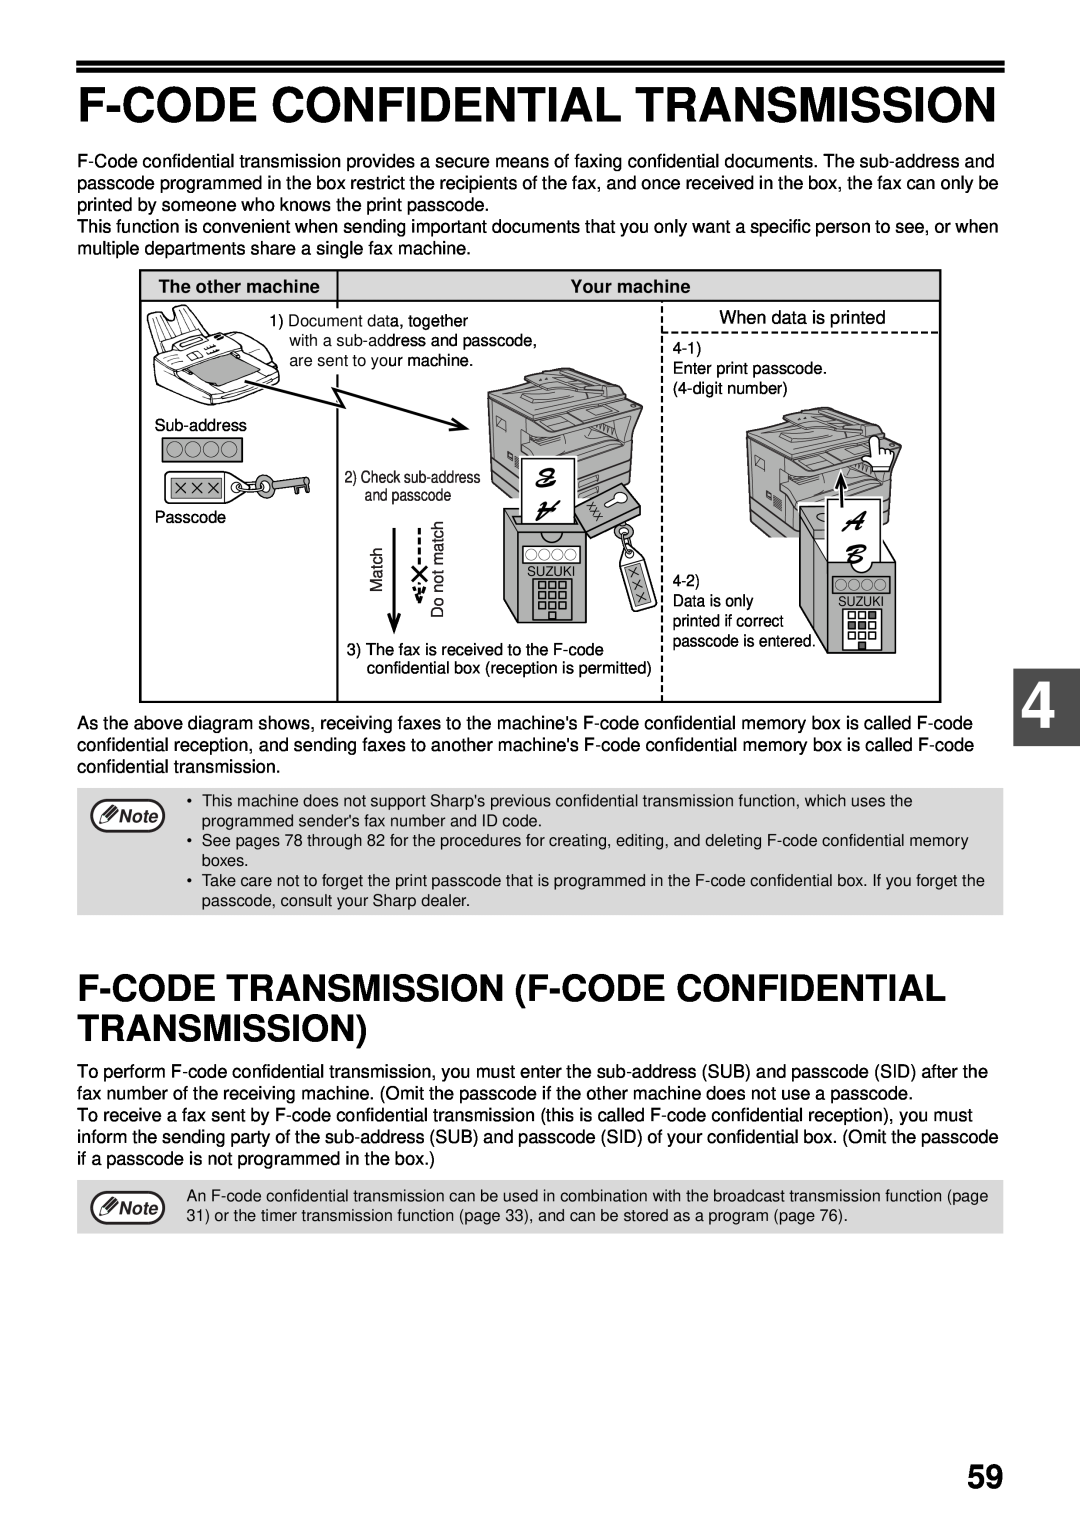 Sharp MX-FX13 appendix F-Code Transmission F-Code Confidential Transmission, The other machine, Your machine 